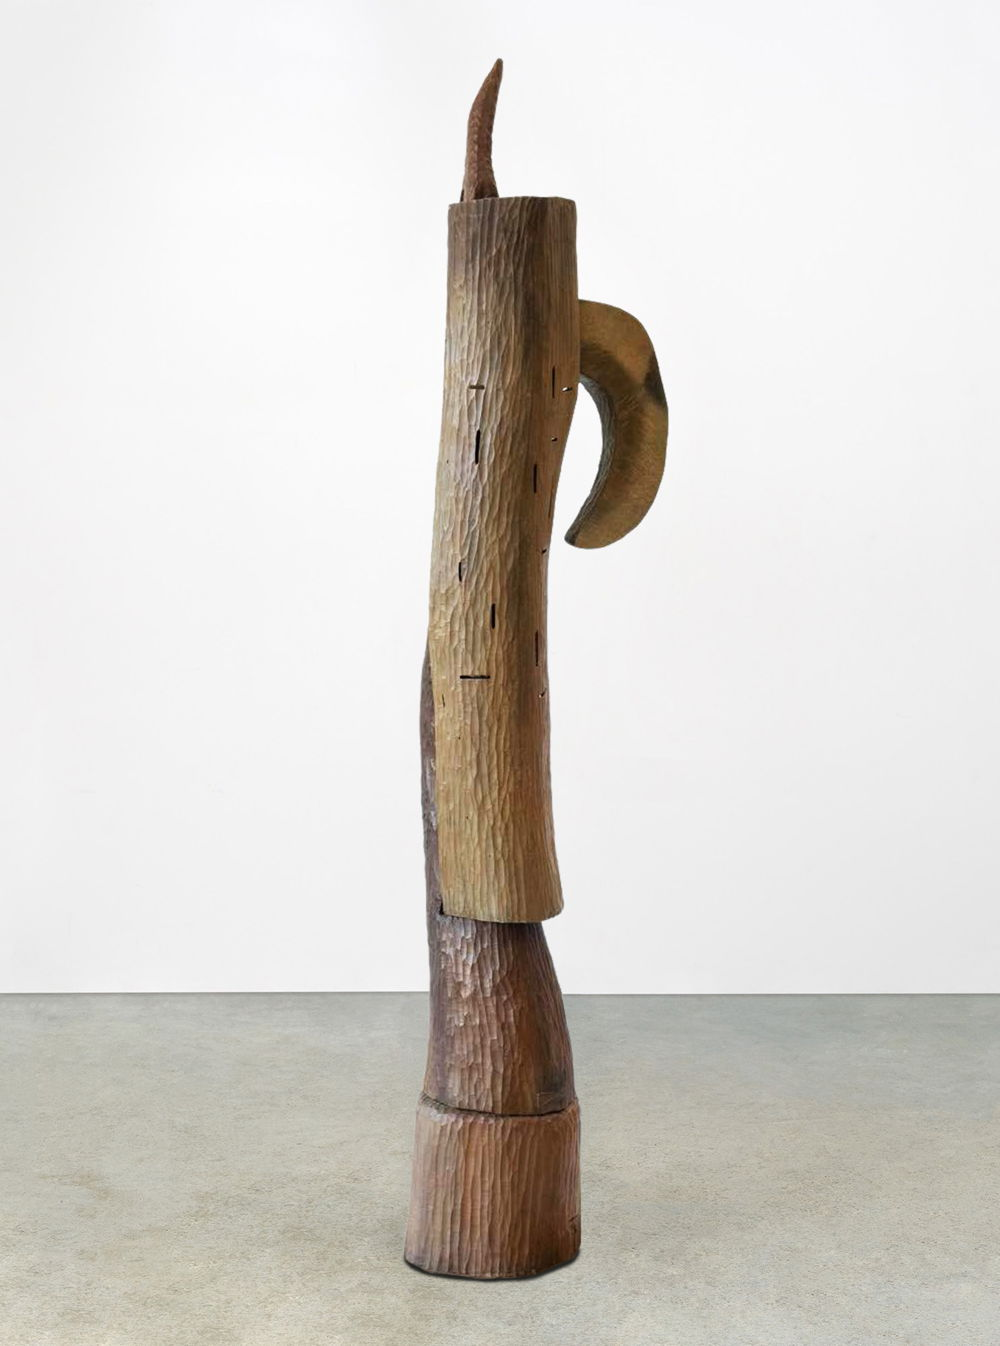 Photo of a tall wooden sculpture made of several pieces. At the top, a piece juts out like a horn, while another curves down like a banana.